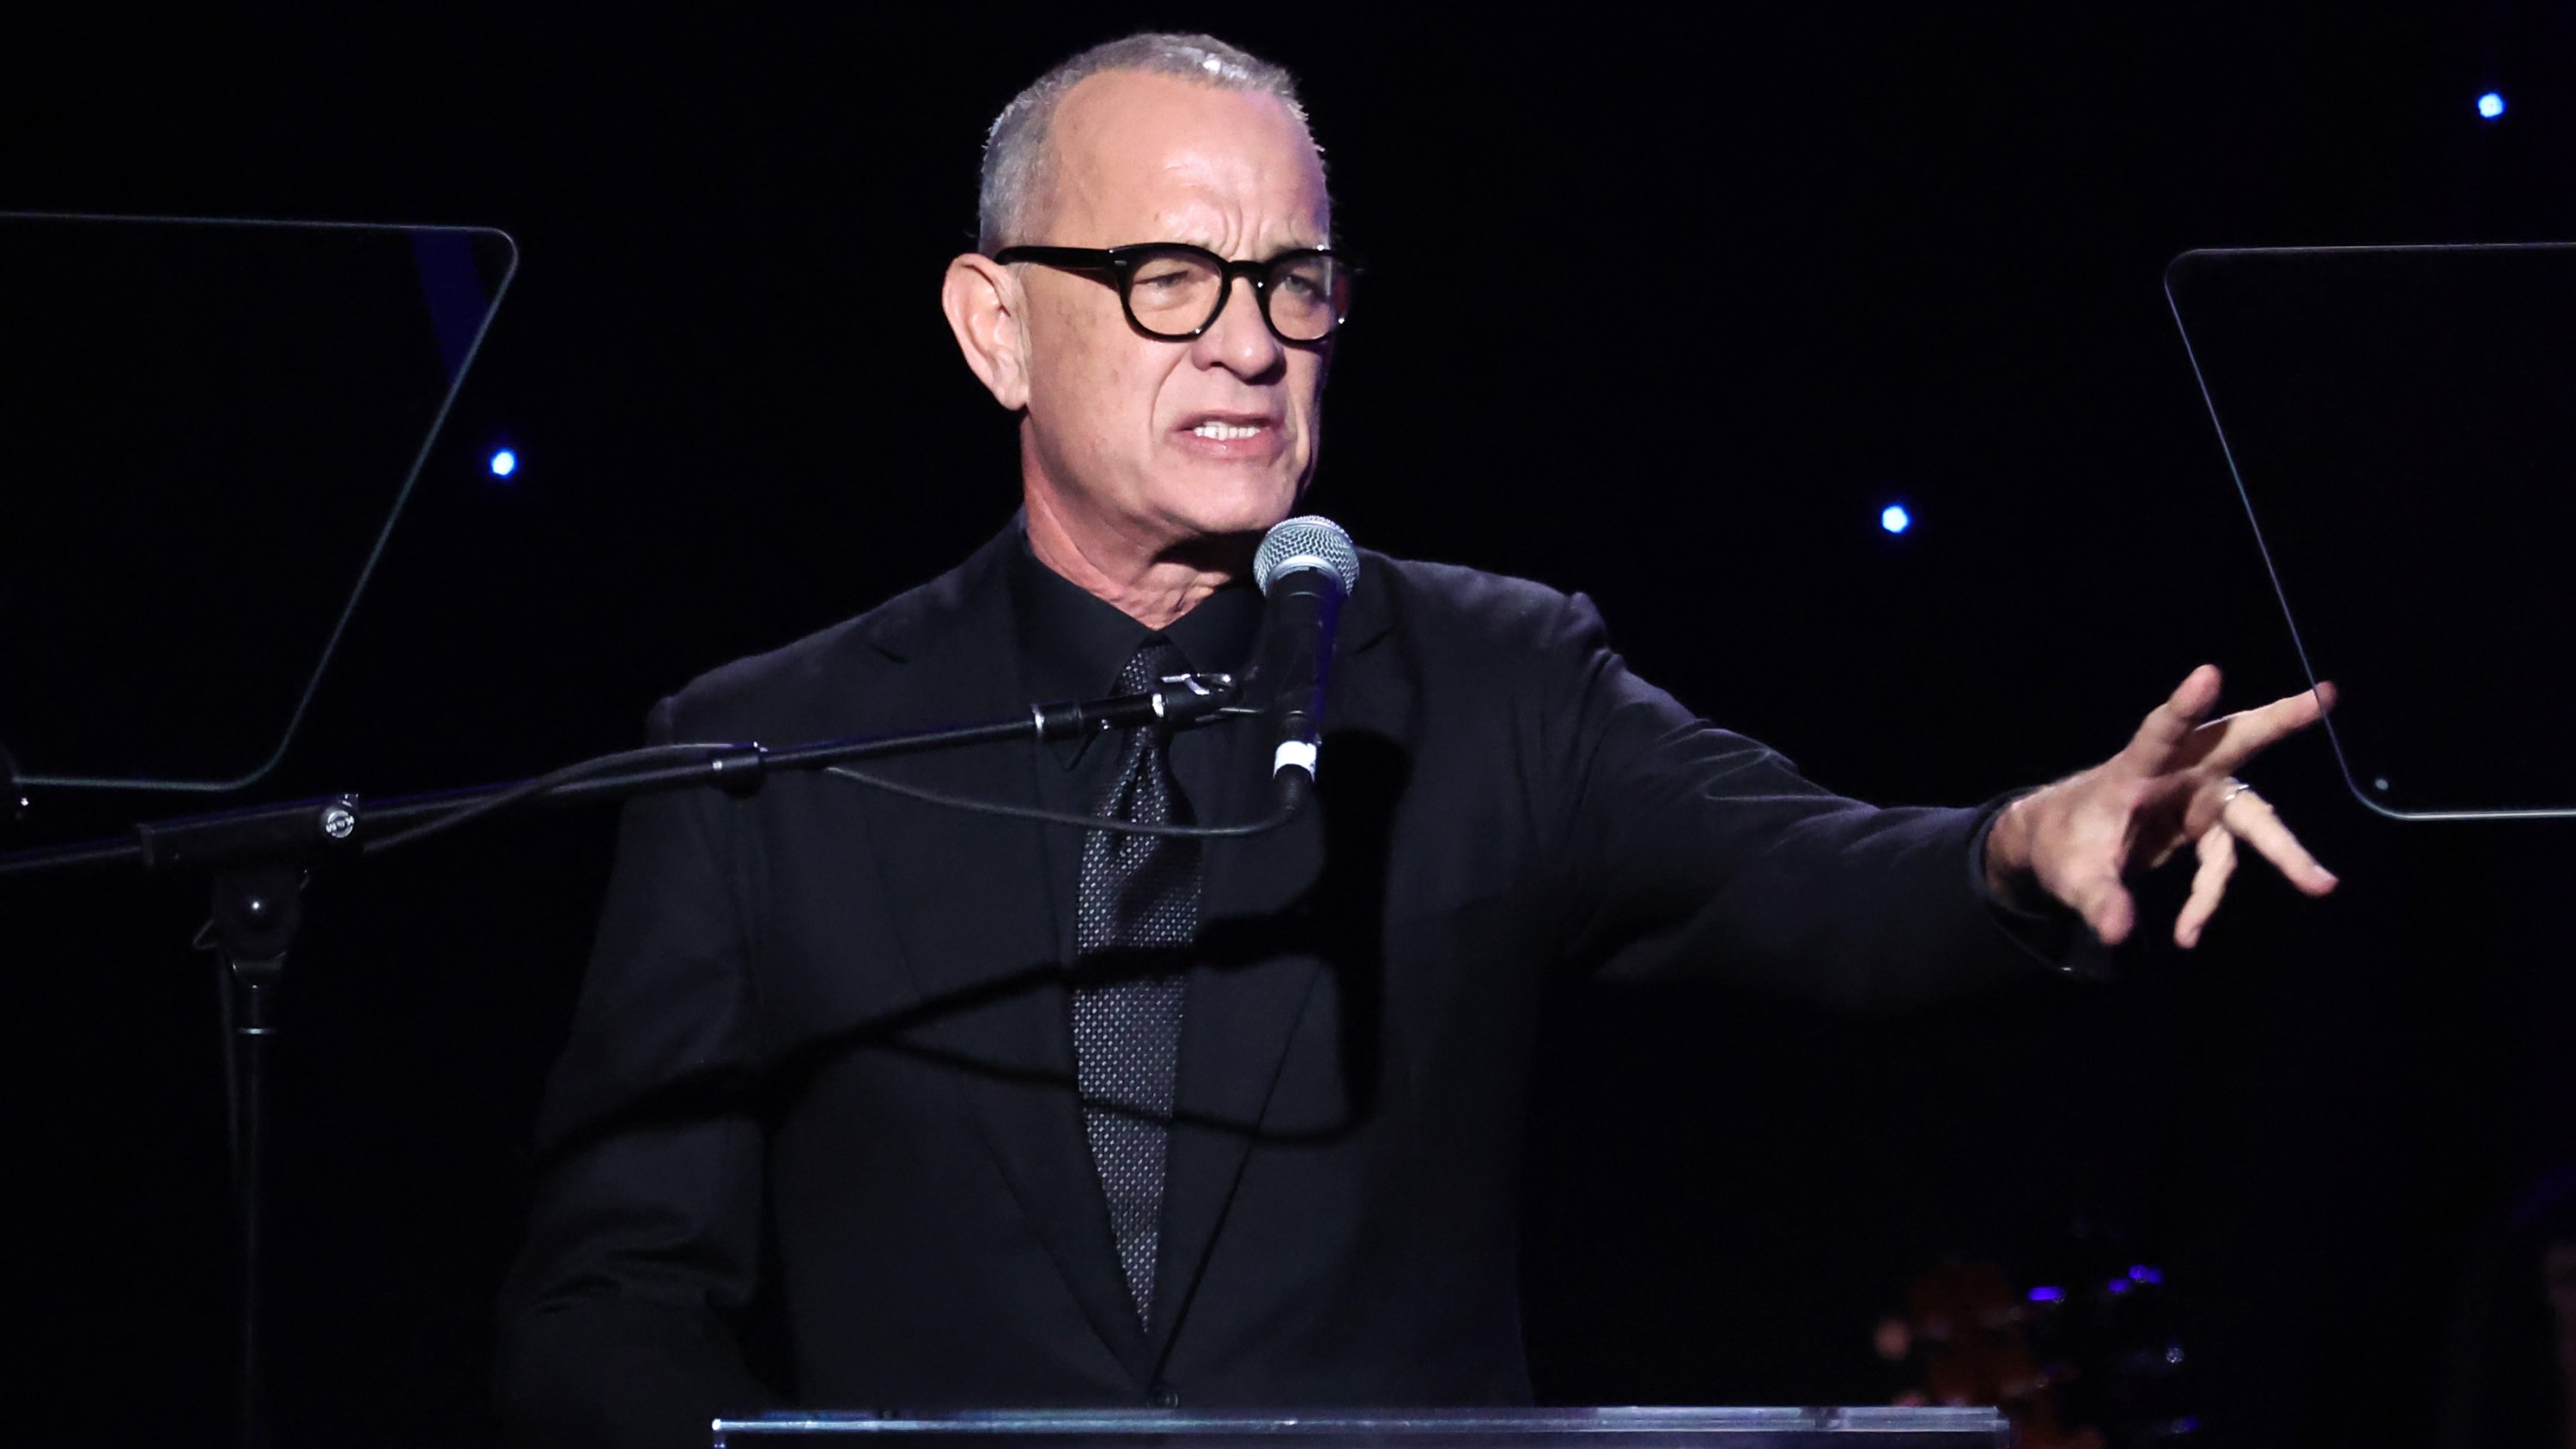 BEVERLY HILLS, CALIFORNIA - FEBRUARY 03: (FOR EDITORIAL USE ONLY) Tom Hanks speaks onstage during the 66th GRAMMY Awards Pre-GRAMMY Gala & GRAMMY Salute to Industry Icons Honoring Jon Platt at The Beverly Hilton on February 03, 2024 in Beverly Hills, California. (Photo by Amy Sussman/Getty Images)